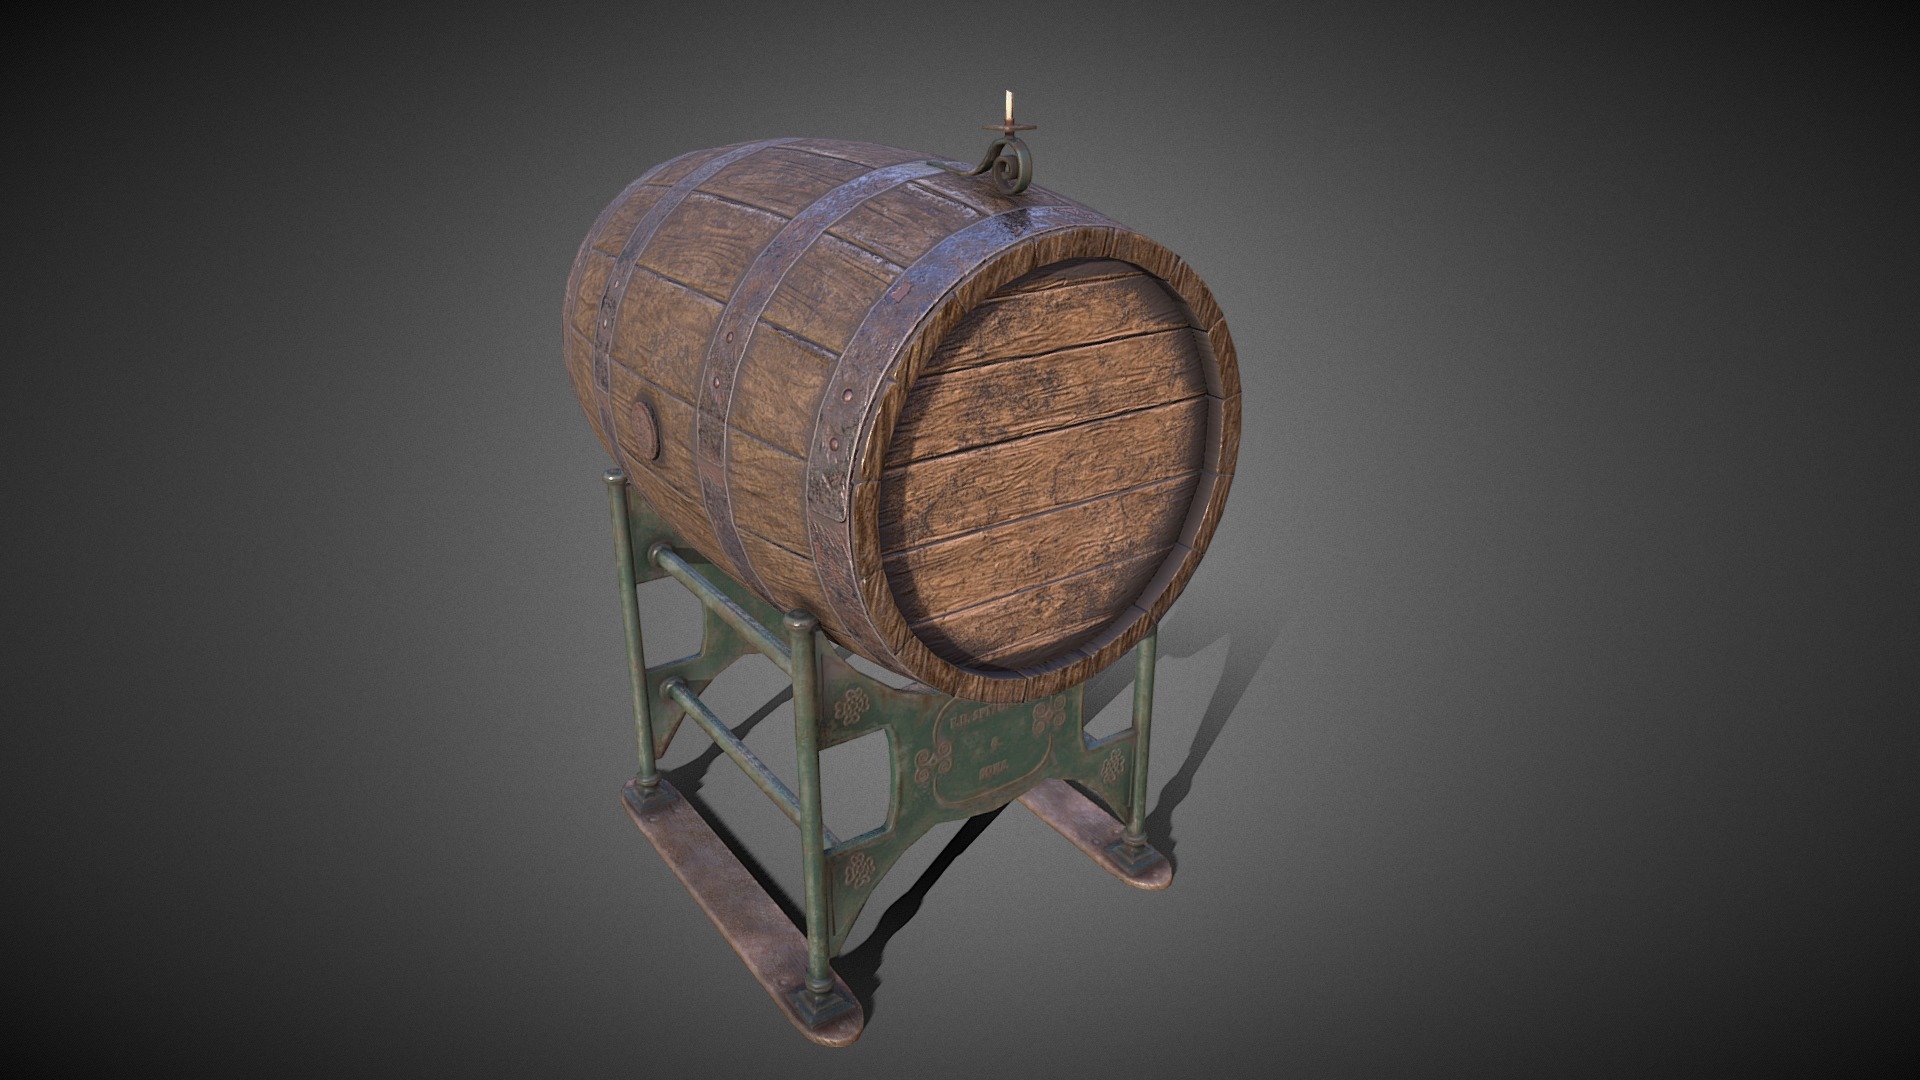 Wine Barrel including barrel stand and a barrel mounted candle holder,
Made with Blender and Substance Painter 3d model